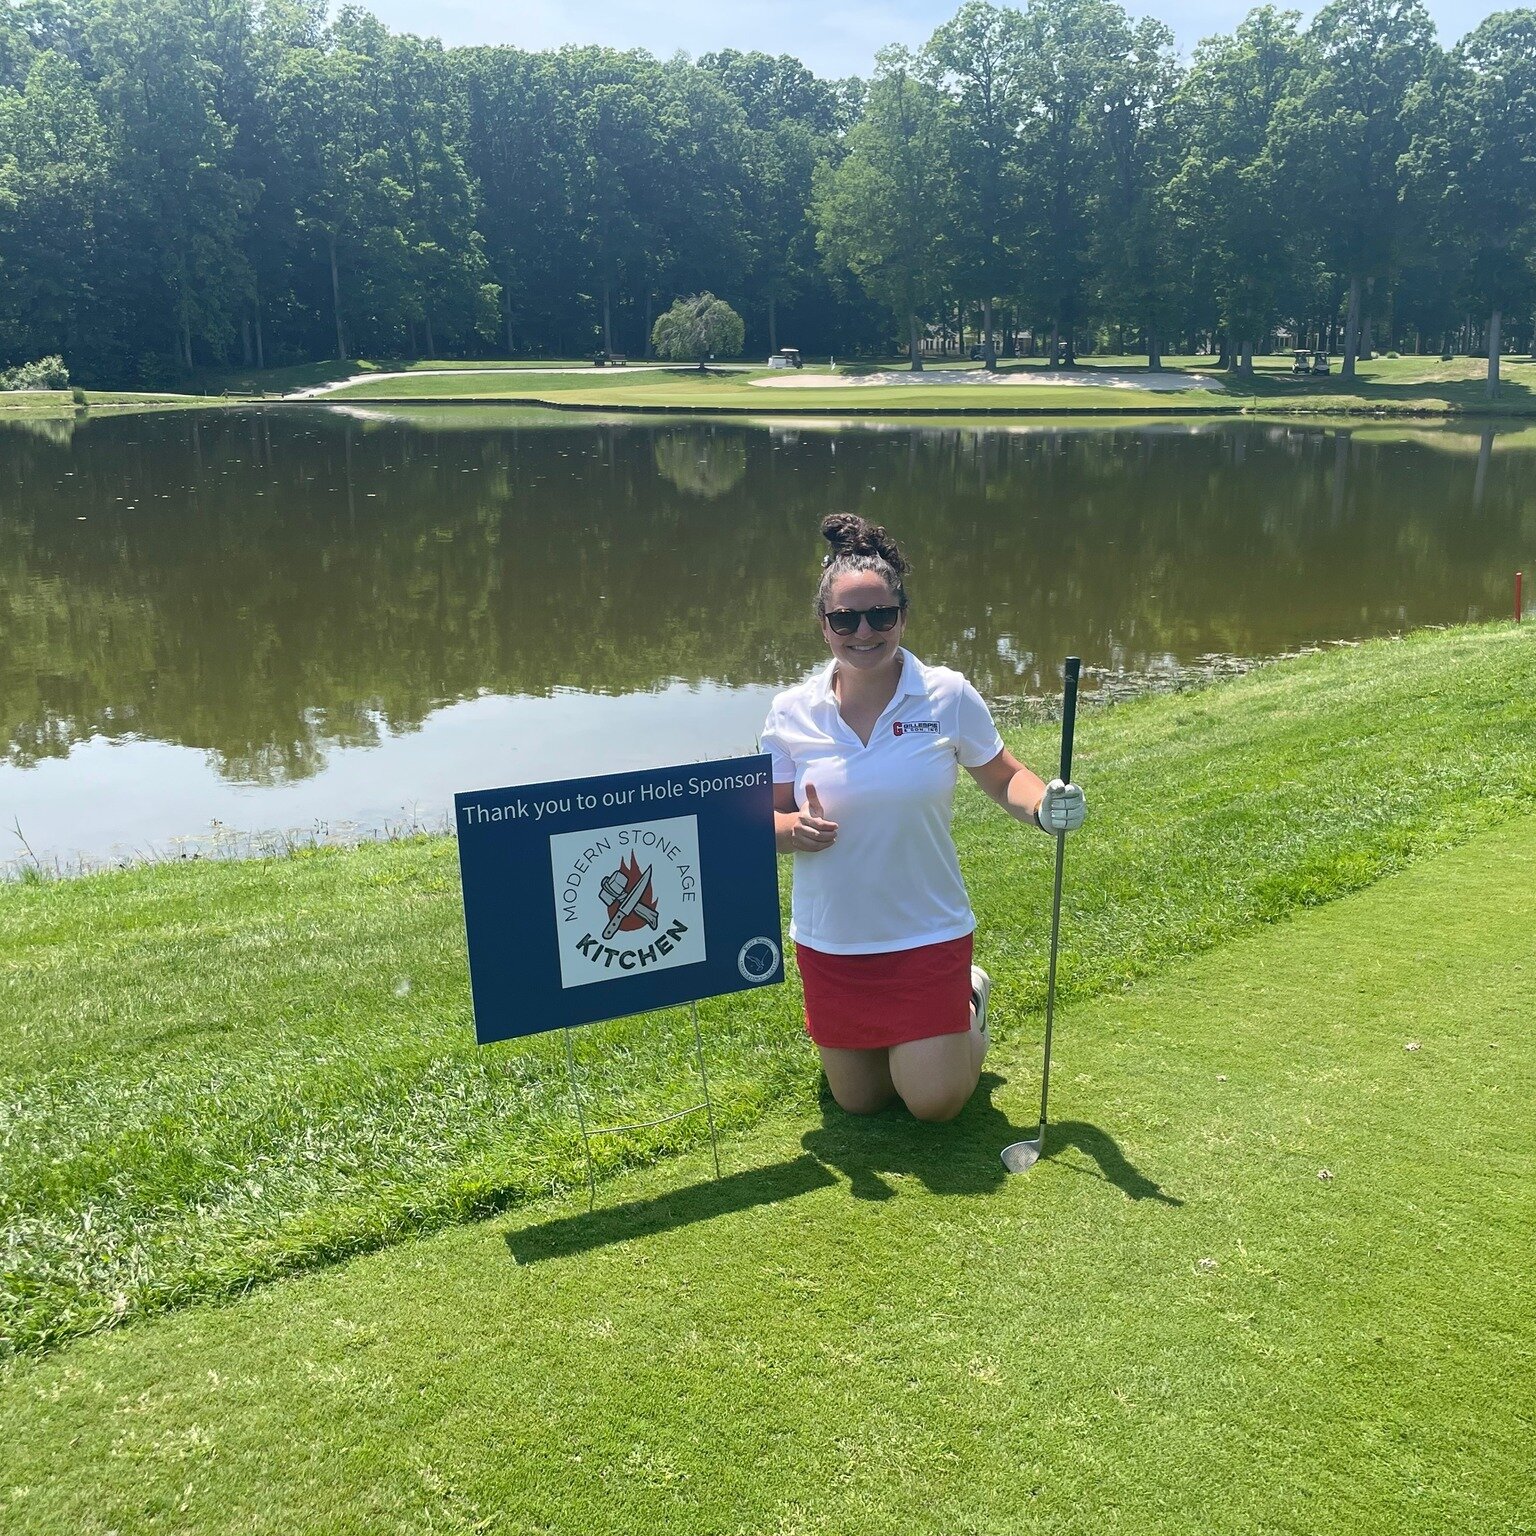 💗supporting our local community💗

The sun was clearly shining on Friday when Kent School had their annual golfing fundraiser and the Modern Stone Age Kitchen sponsored a hole. Maria finished up pretzels and baguettes just in time to get her round o